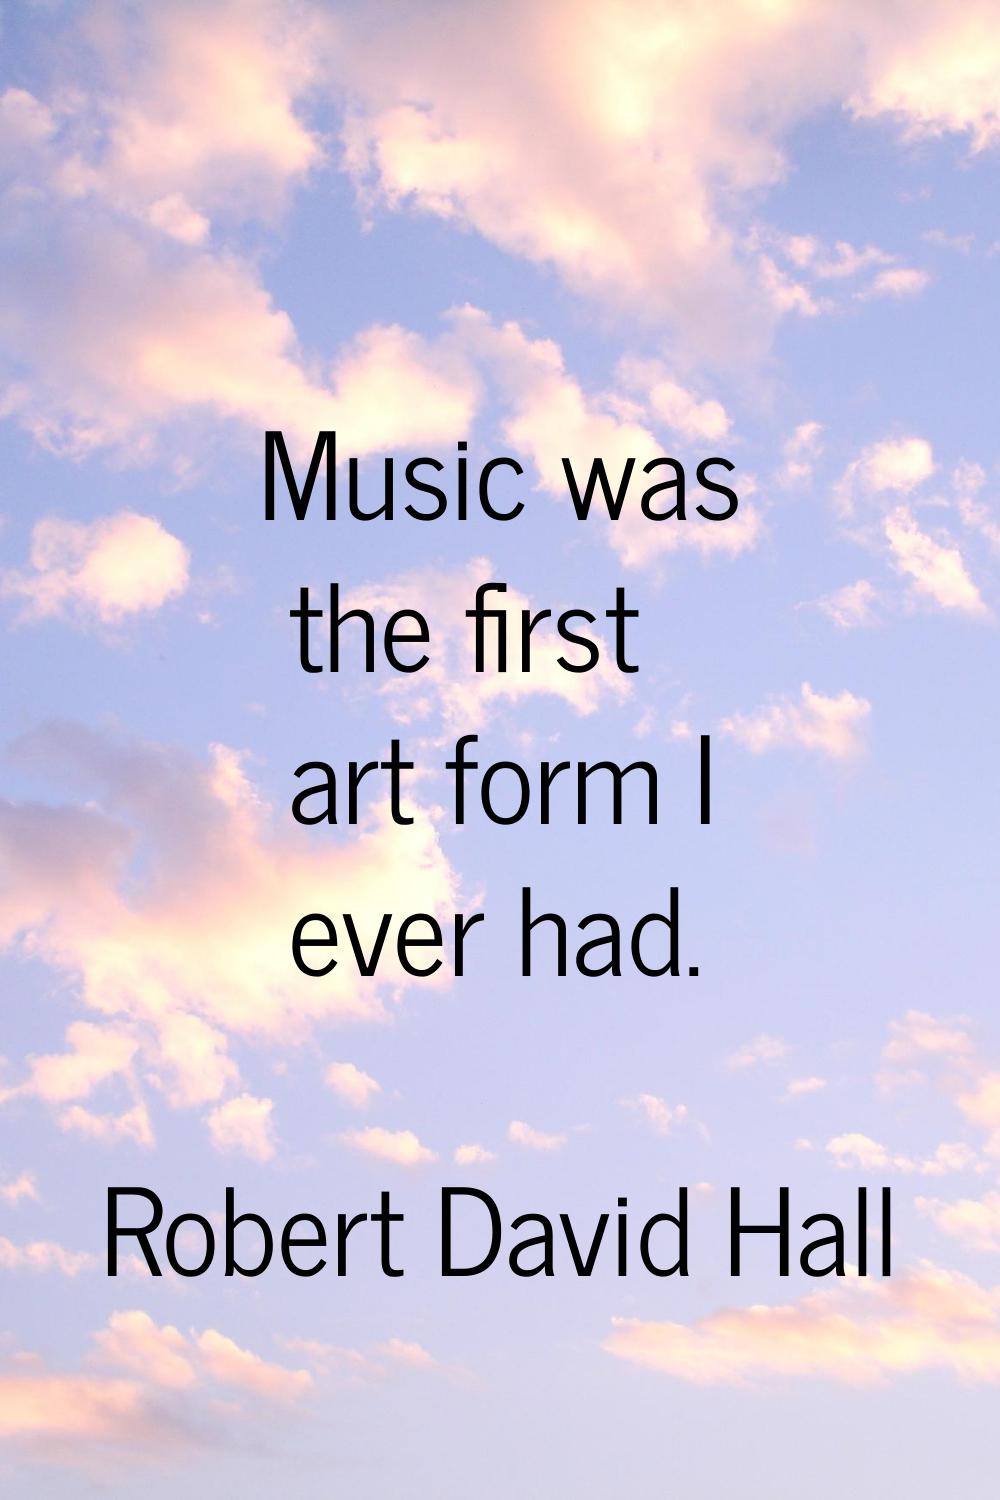 Music was the first art form I ever had.